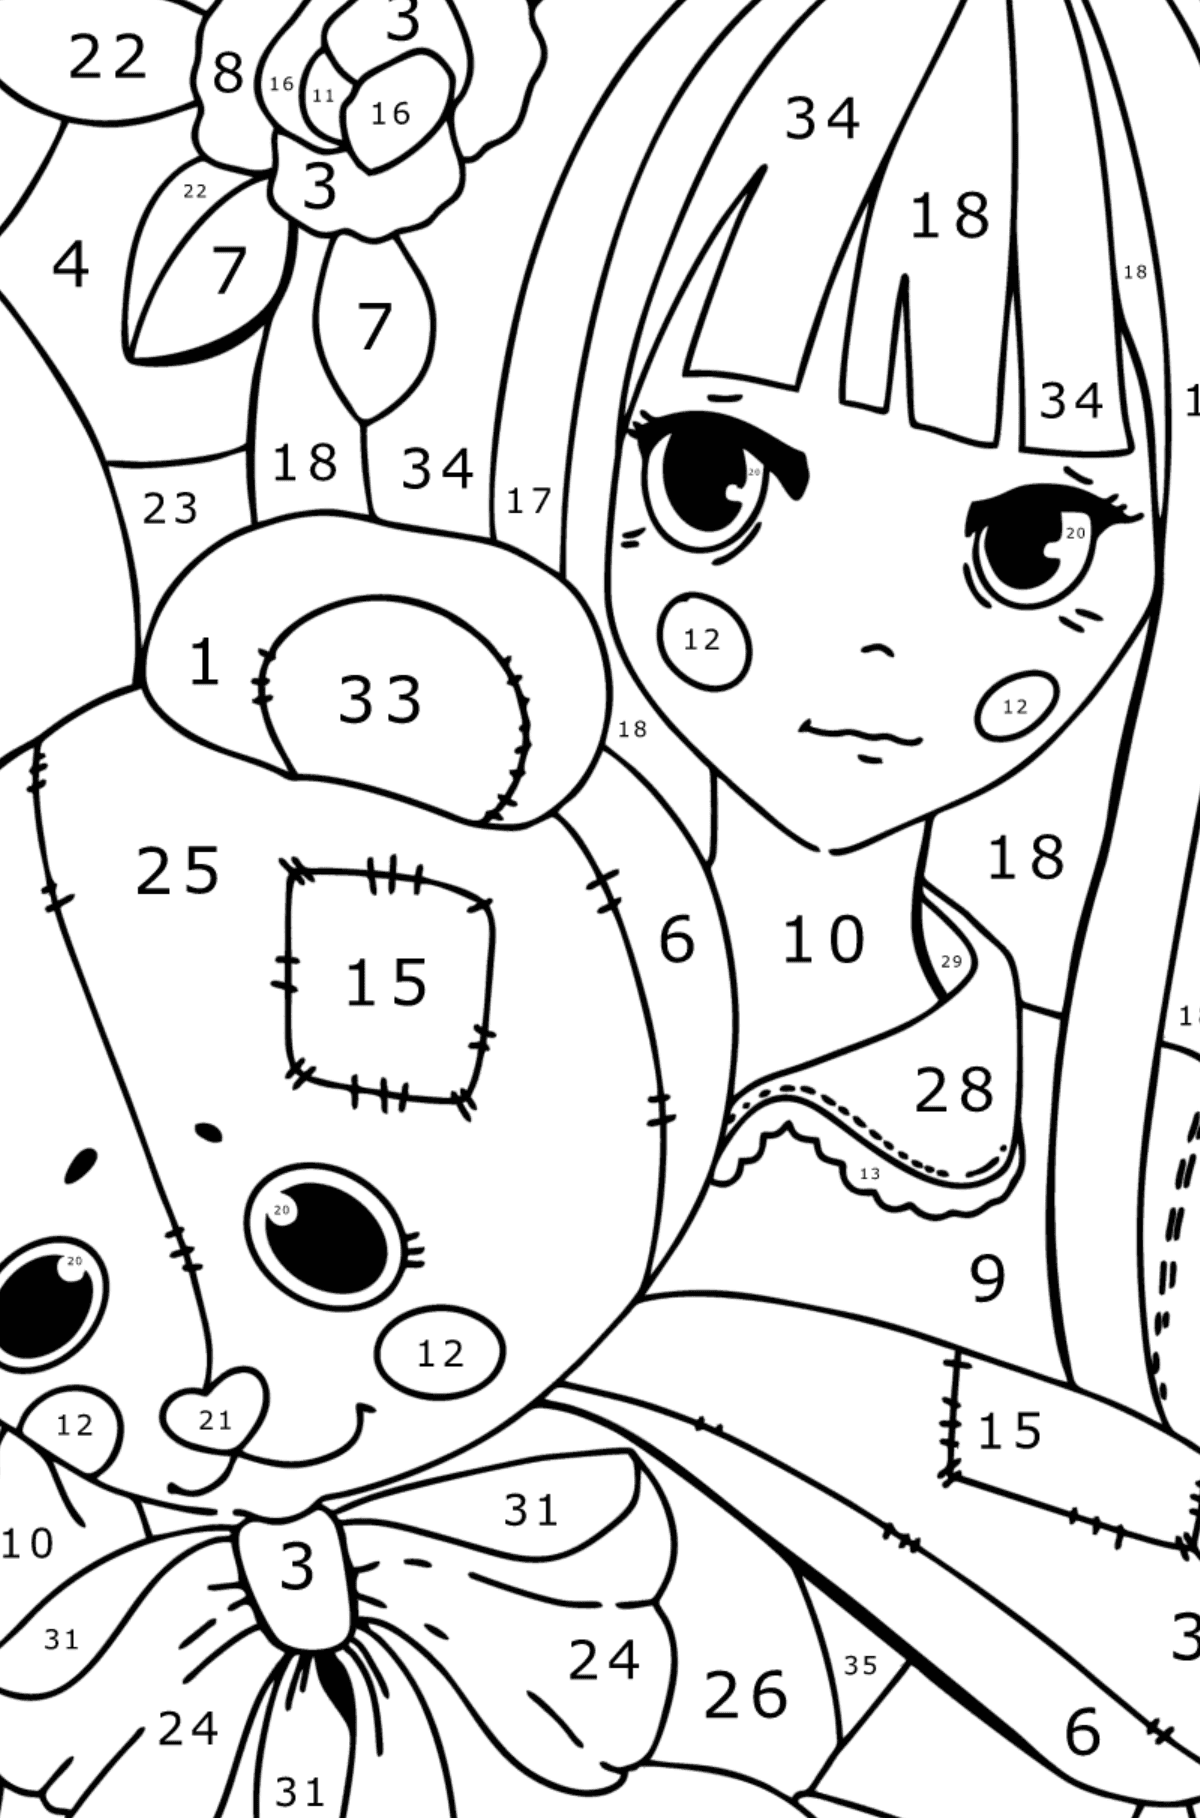 Anime girl coloring page holding a teddy - Coloring by Numbers for Kids